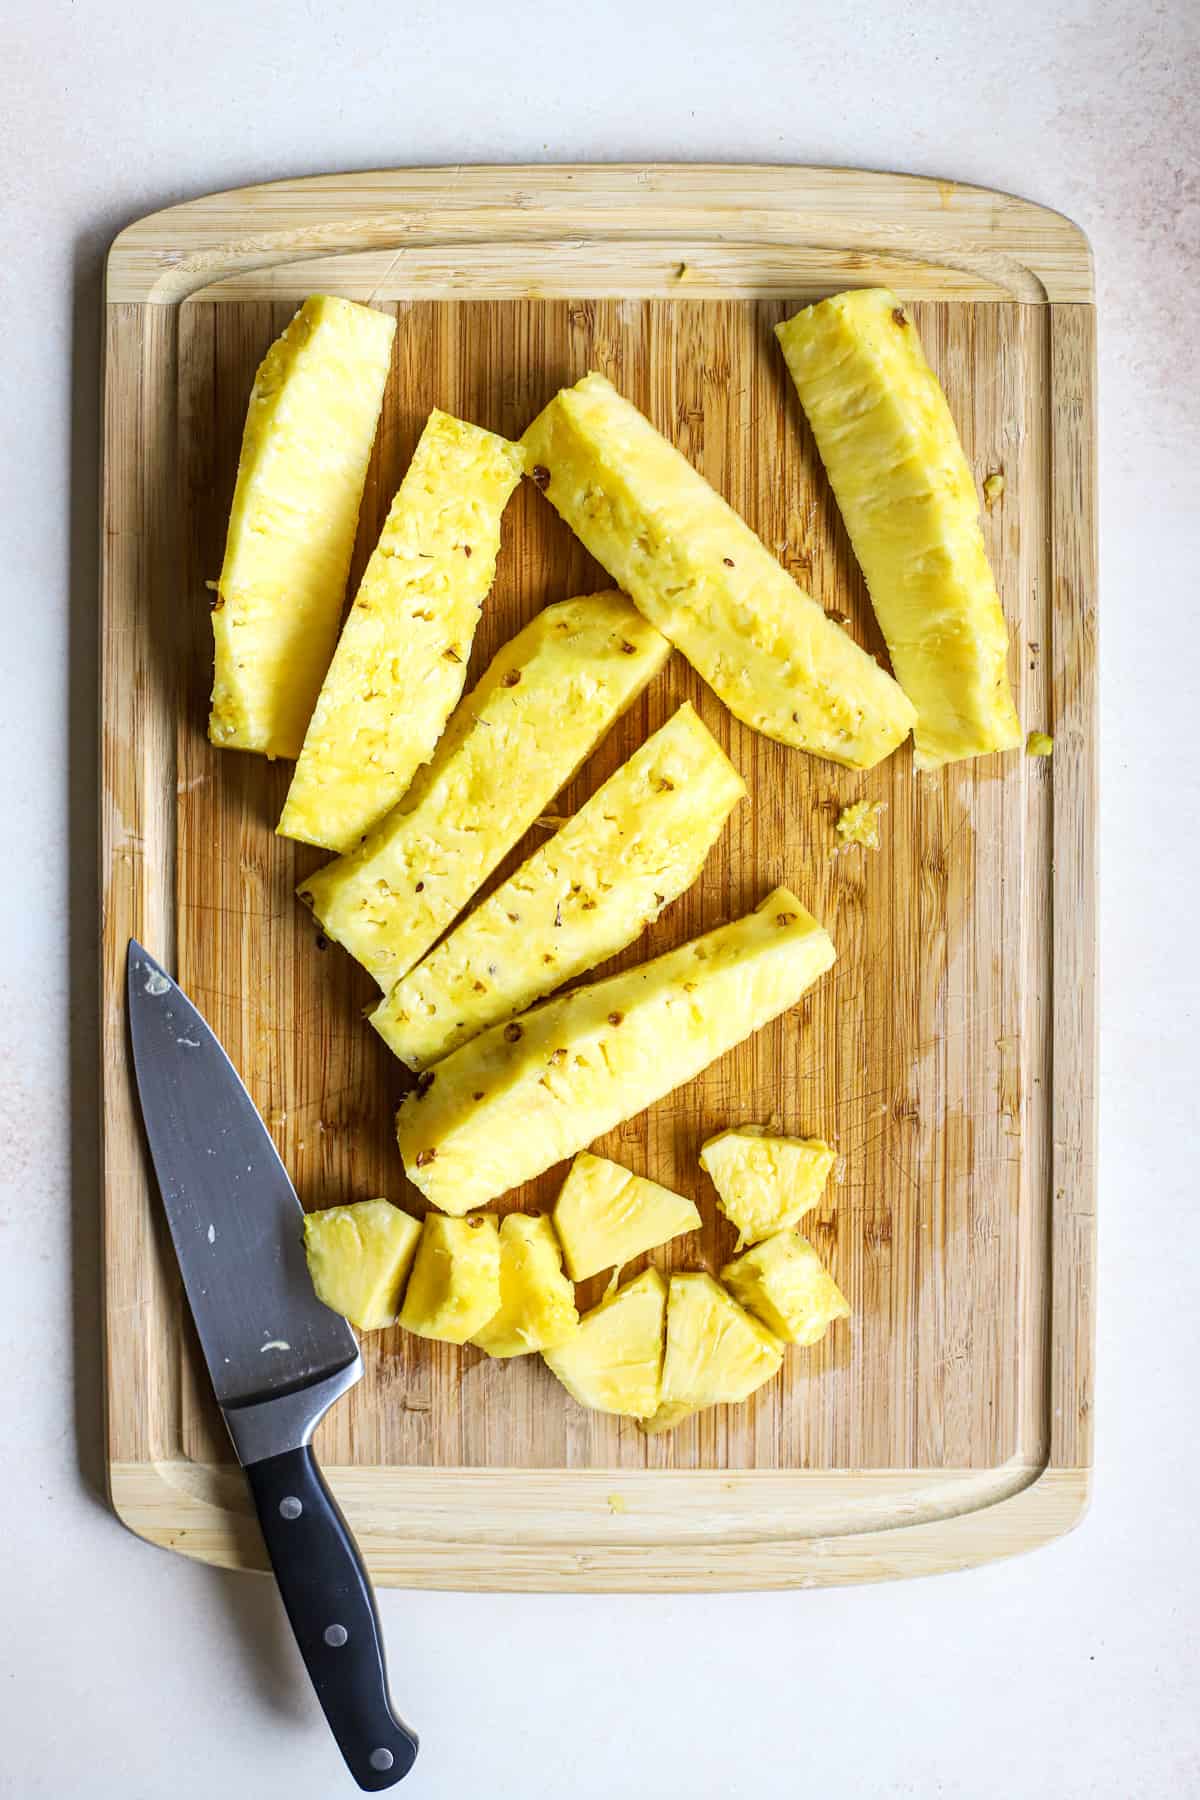 Fresh pineapple sliced lengthwise, with one piece cut into chunks on bamboo cutting board, next to chef's knife